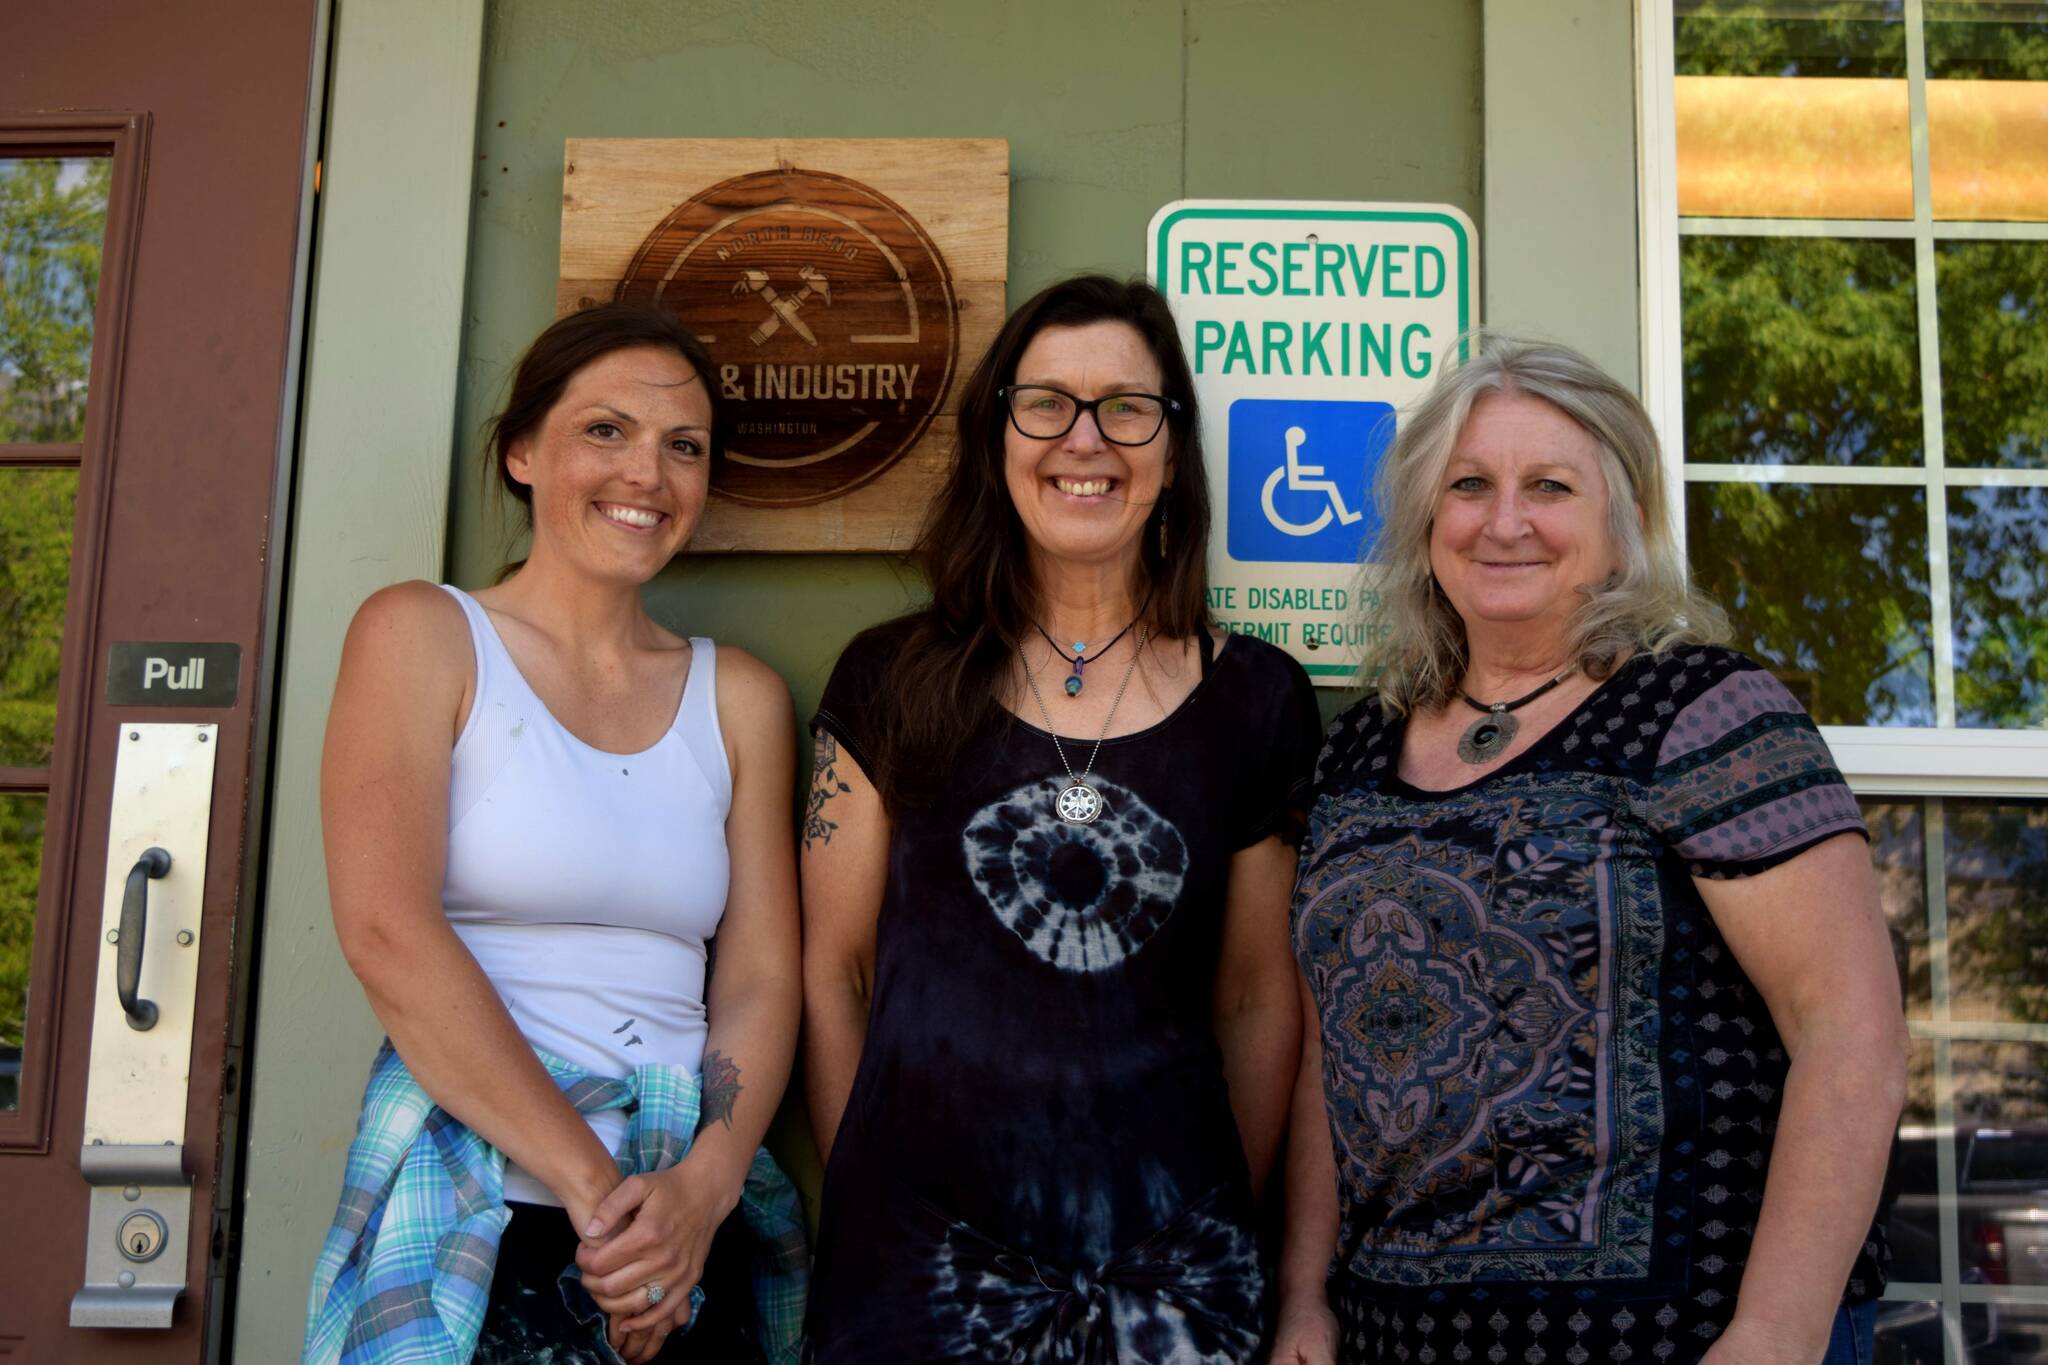 Photo by Conor Wilson/Valley Record.
Members of North Bend Art & Industry pose for a photo outside their new space in downtown North Bend. From left: Sarah Hughes, Ellen Rowen, Deb Landers. NBA&I will host an open house this Saturday.